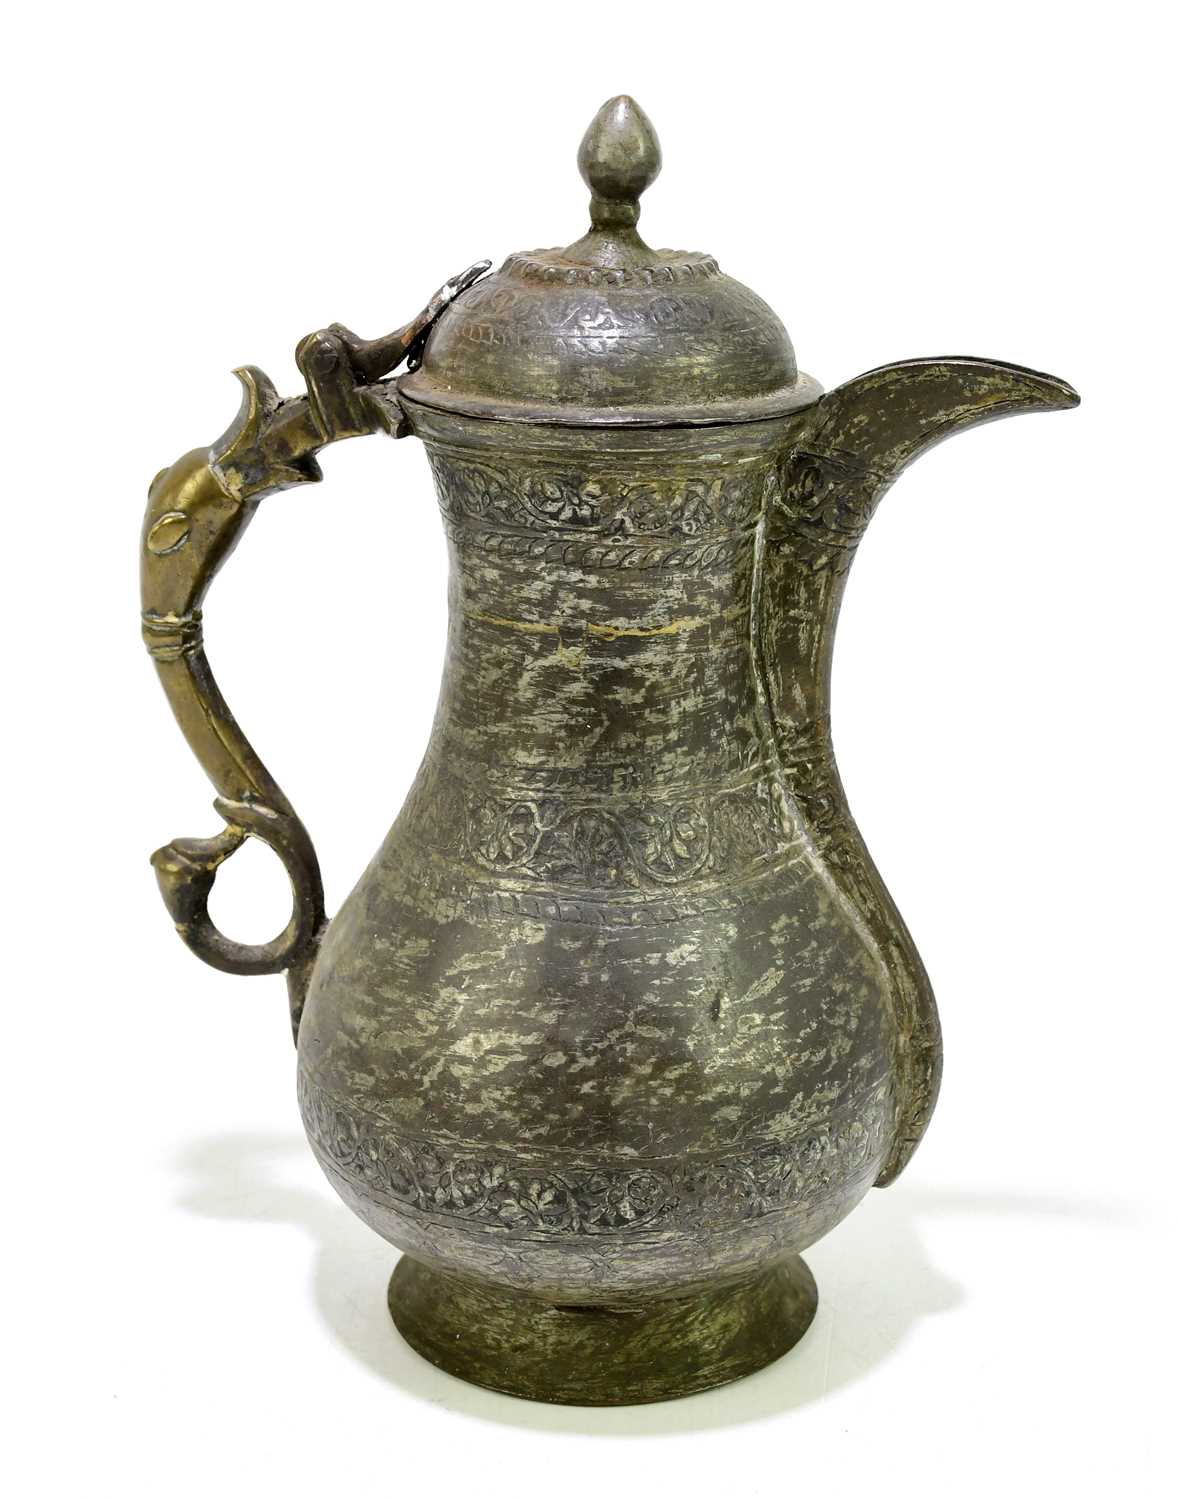 A 19th century Persian metal ewer, with foliate detailing and serpent handle, height 23cm.